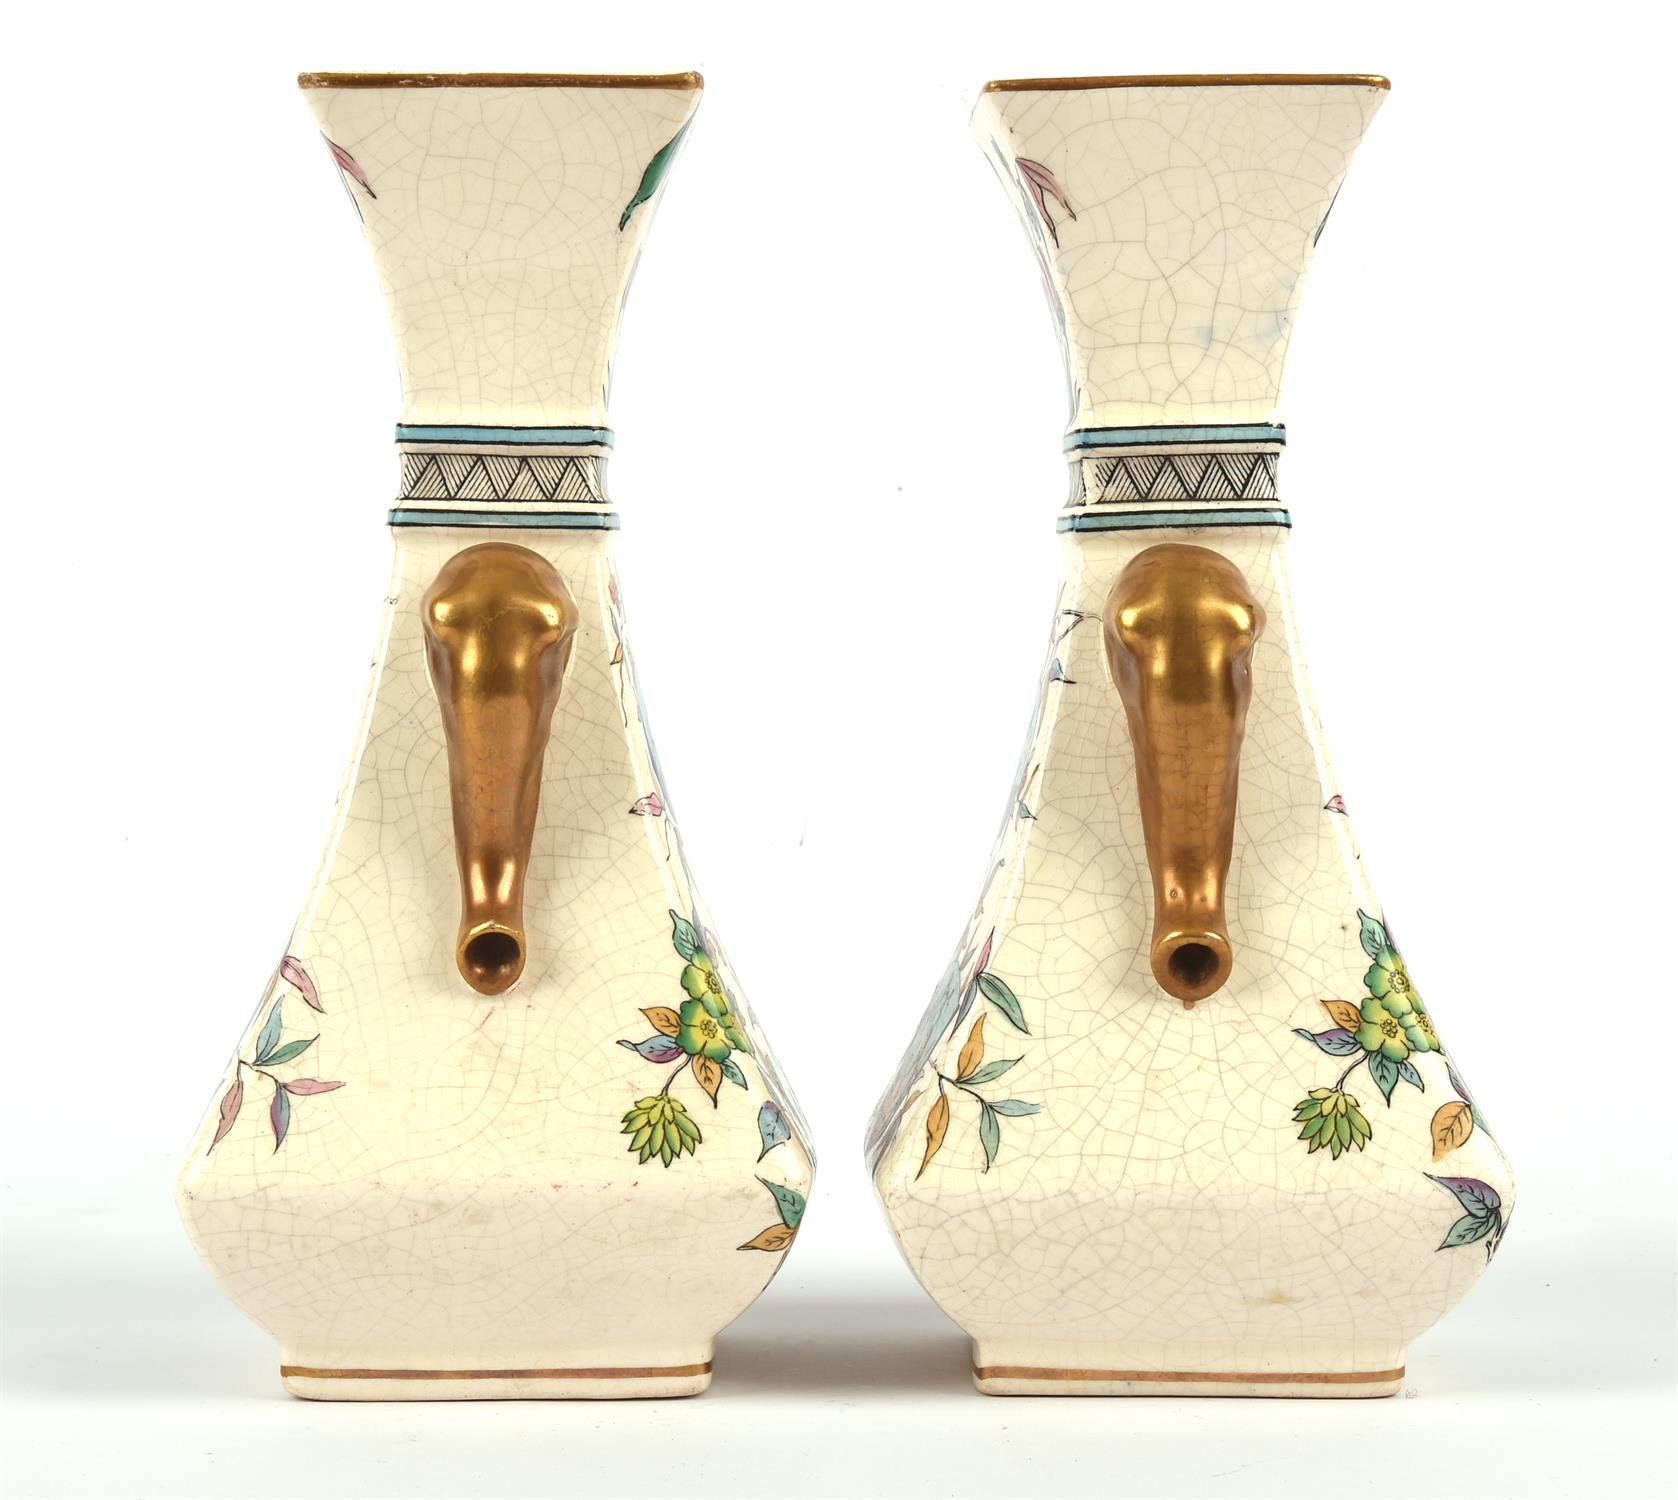 Christopher Dresser (British, 1834-1904), pair of printed and painted vases, with elephant head - Image 2 of 4